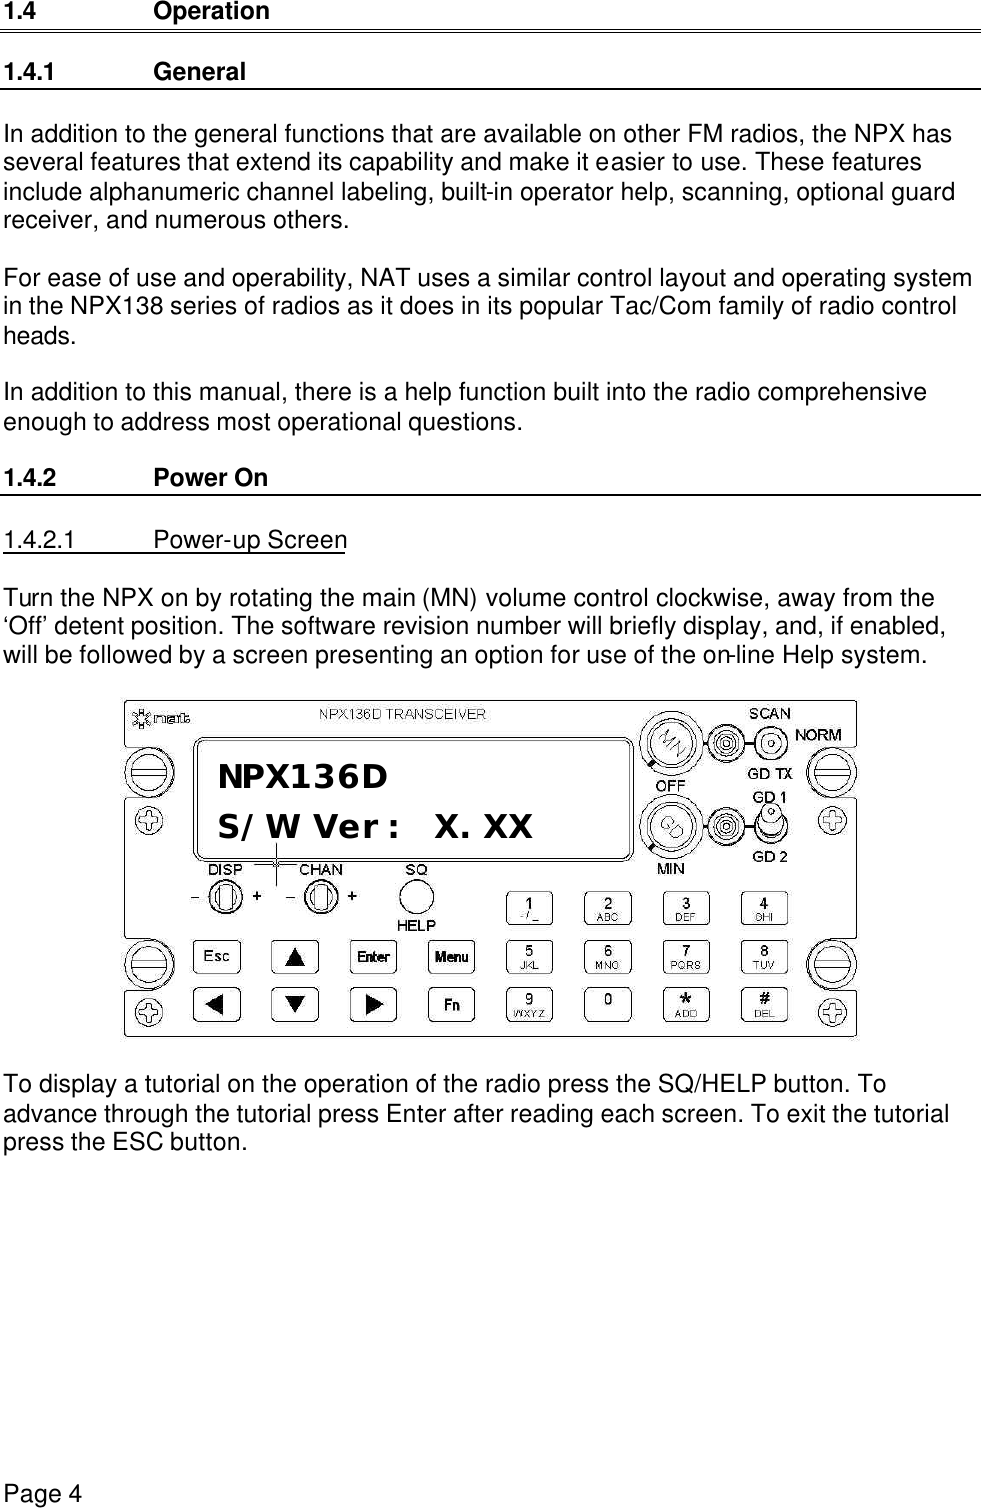 Page 4      1.4 Operation  1.4.1 General  In addition to the general functions that are available on other FM radios, the NPX has several features that extend its capability and make it easier to use. These features include alphanumeric channel labeling, built-in operator help, scanning, optional guard receiver, and numerous others.  For ease of use and operability, NAT uses a similar control layout and operating system in the NPX138 series of radios as it does in its popular Tac/Com family of radio control heads.  In addition to this manual, there is a help function built into the radio comprehensive enough to address most operational questions.  1.4.2 Power On  1.4.2.1 Power-up Screen  Turn the NPX on by rotating the main (MN) volume control clockwise, away from the ‘Off’ detent position. The software revision number will briefly display, and, if enabled, will be followed by a screen presenting an option for use of the on-line Help system.    To display a tutorial on the operation of the radio press the SQ/HELP button. To advance through the tutorial press Enter after reading each screen. To exit the tutorial press the ESC button. NPX136D S/W Ver: X.XX 